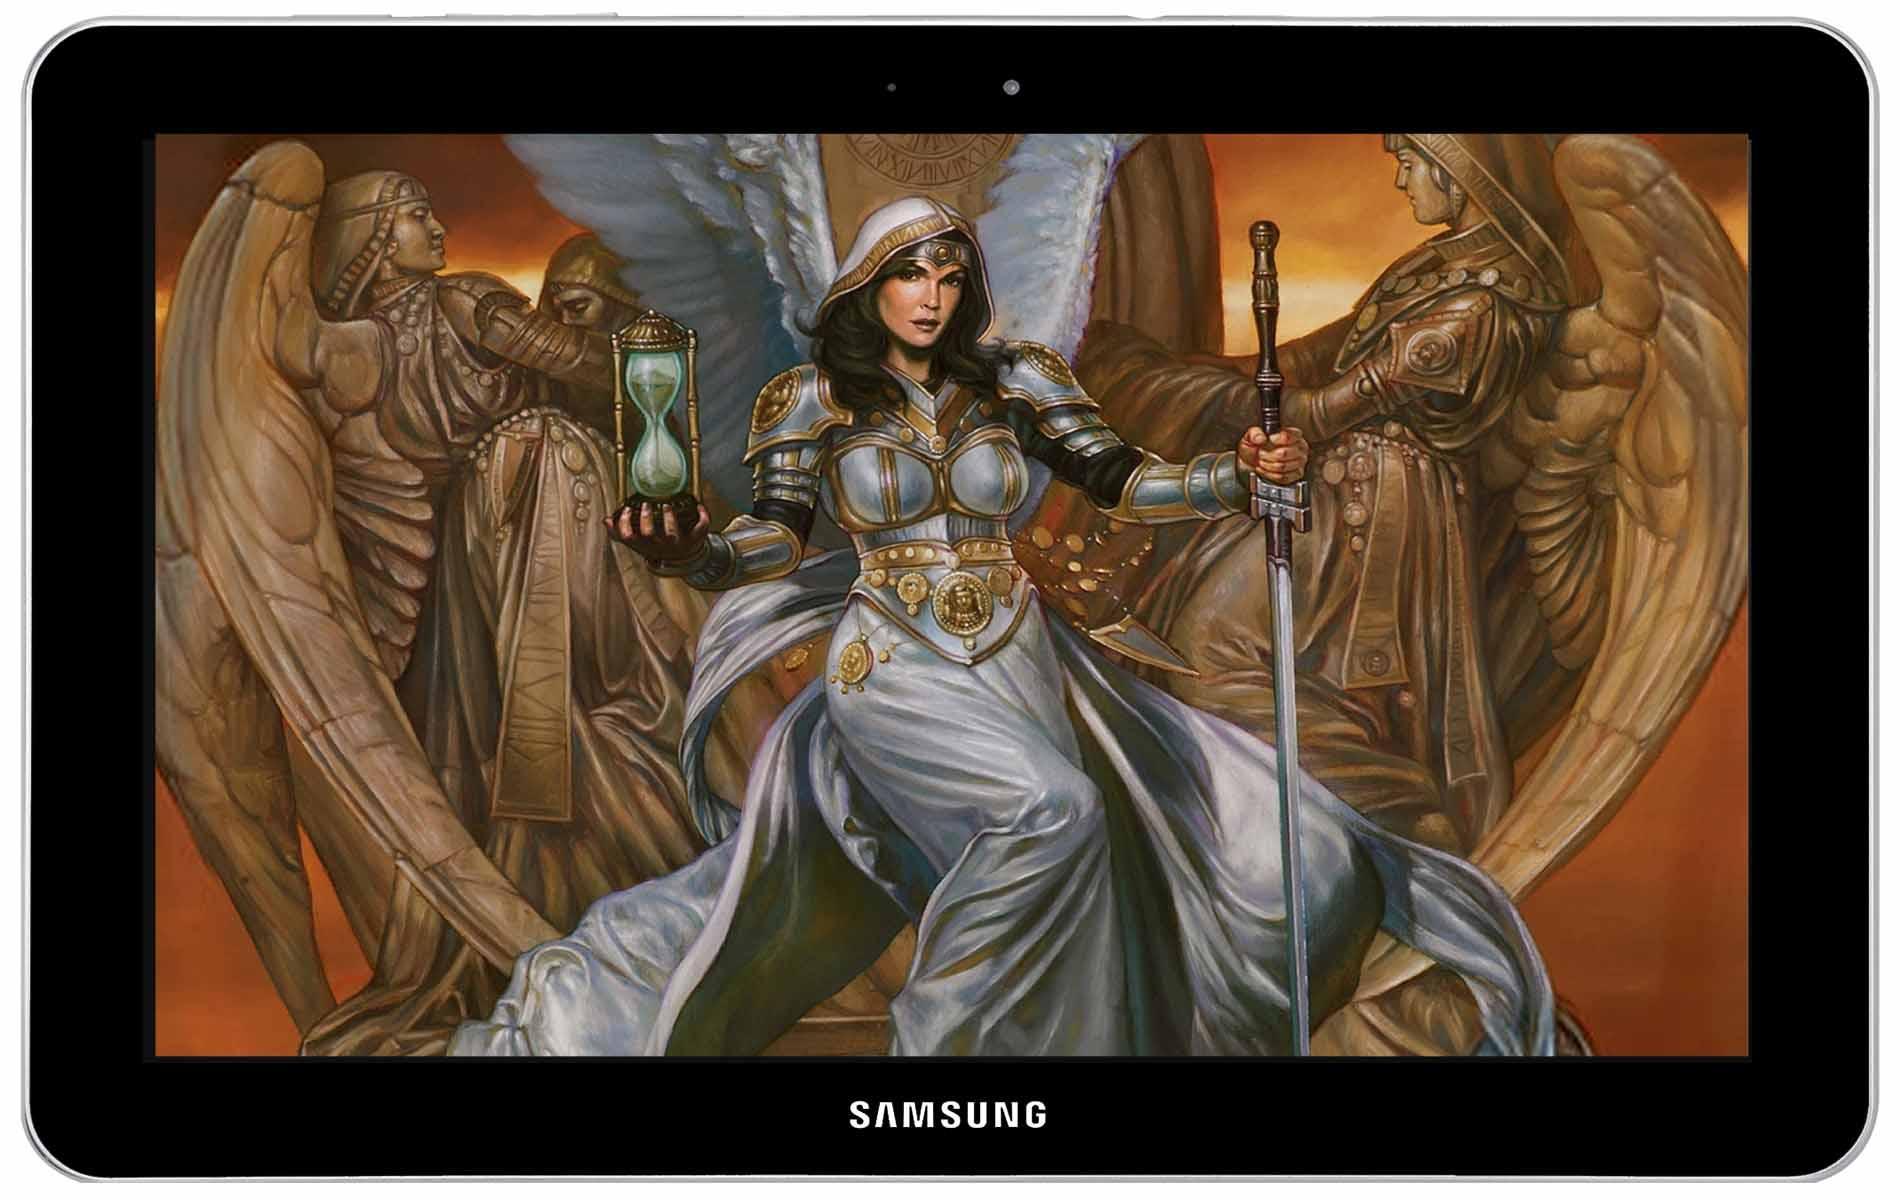 Magic:The Gathering Wallpapers for Android - APK Download